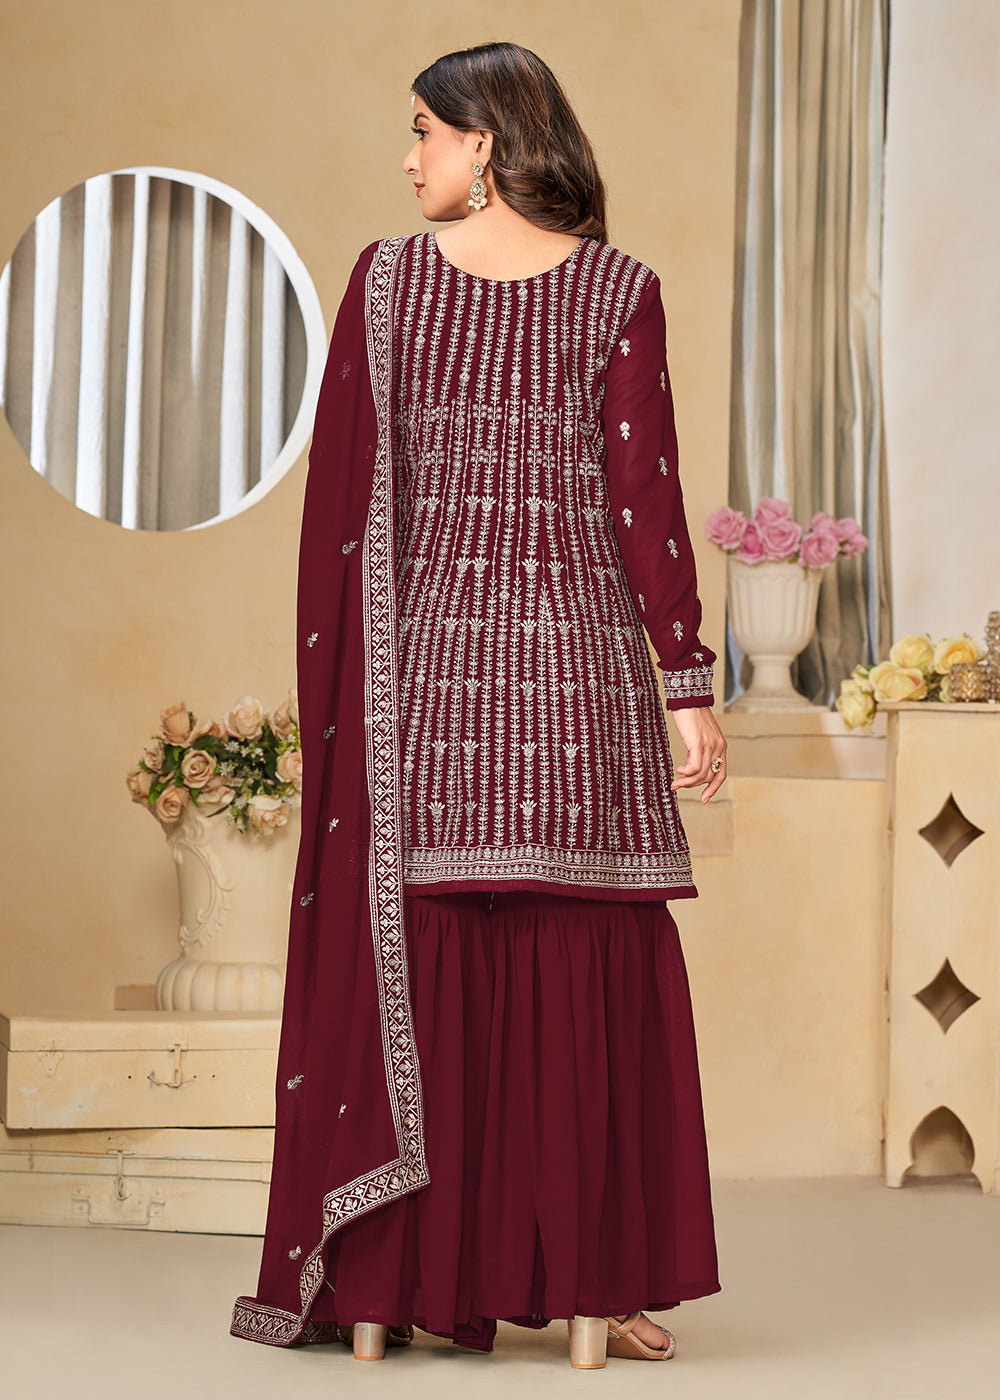 Shop Now Faux Georgette Maroon Embroidered Gharara Style Suit Online at Empress Clothing in USA, UK, Canada, Italy & Worldwide.